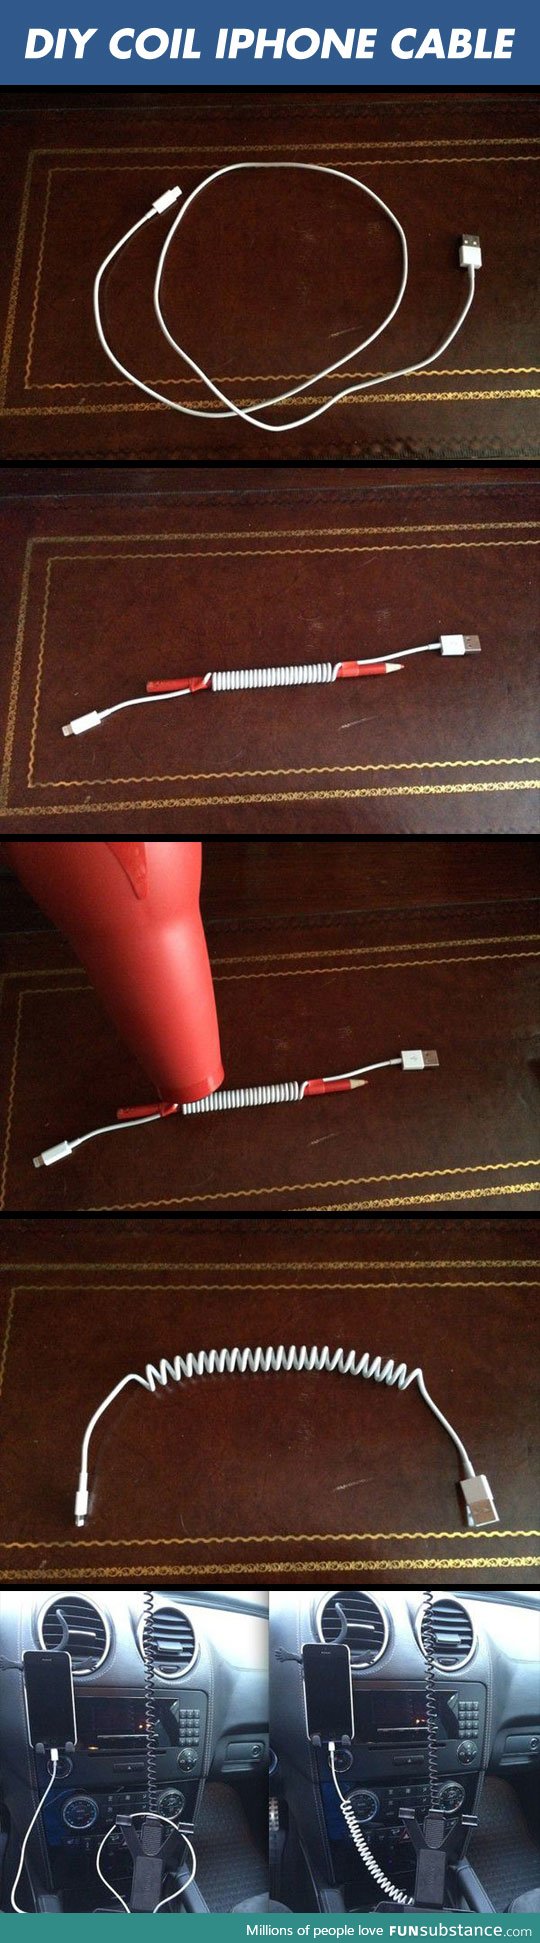 DIY coil iphone cable